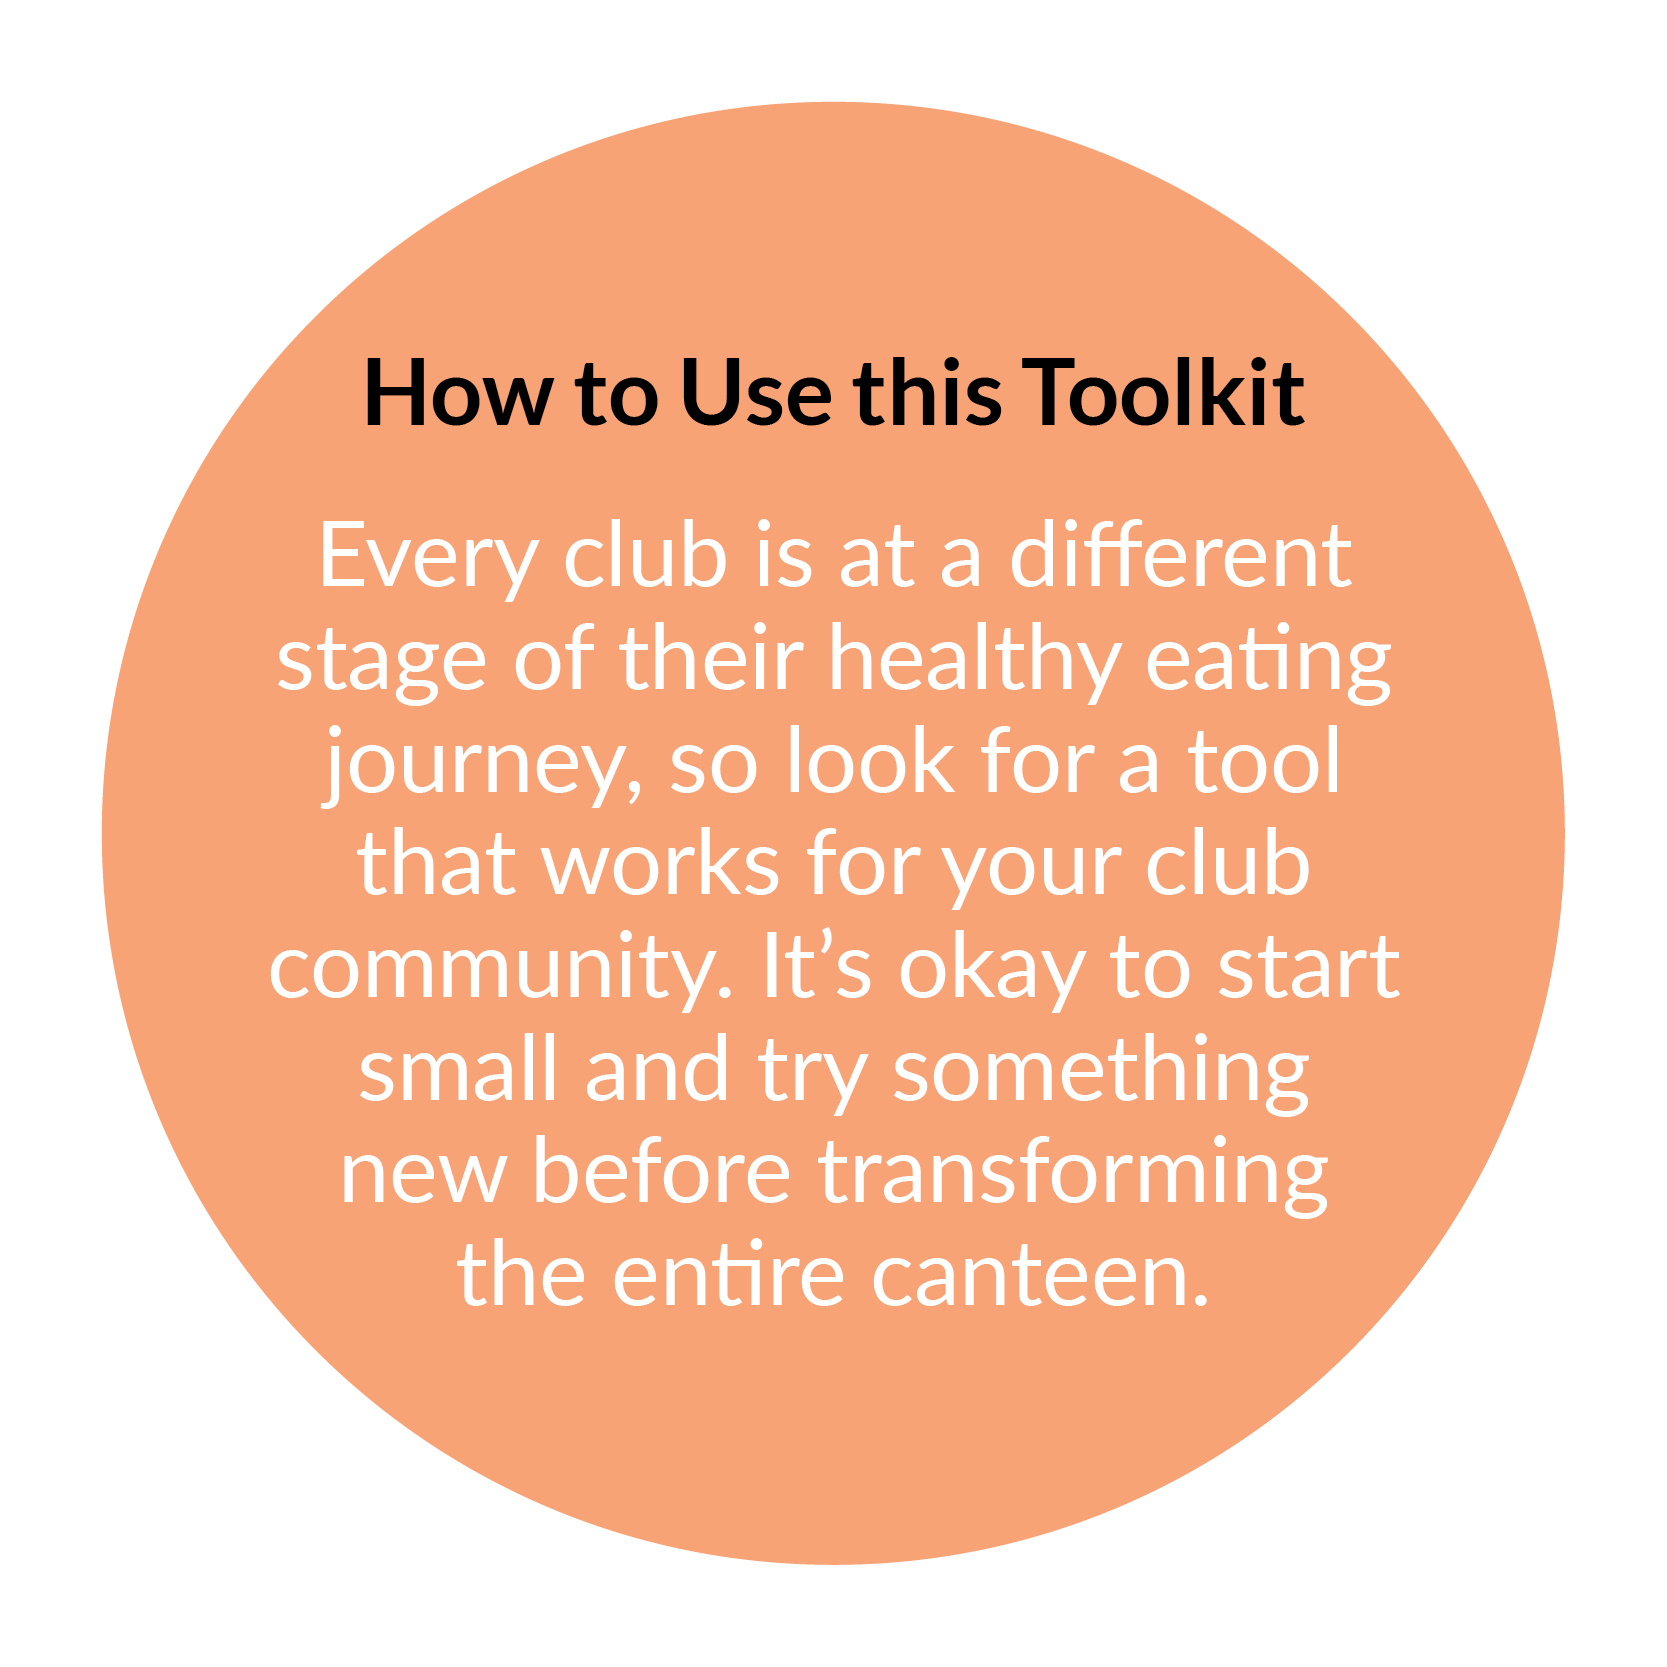 How to Use this Toolkit